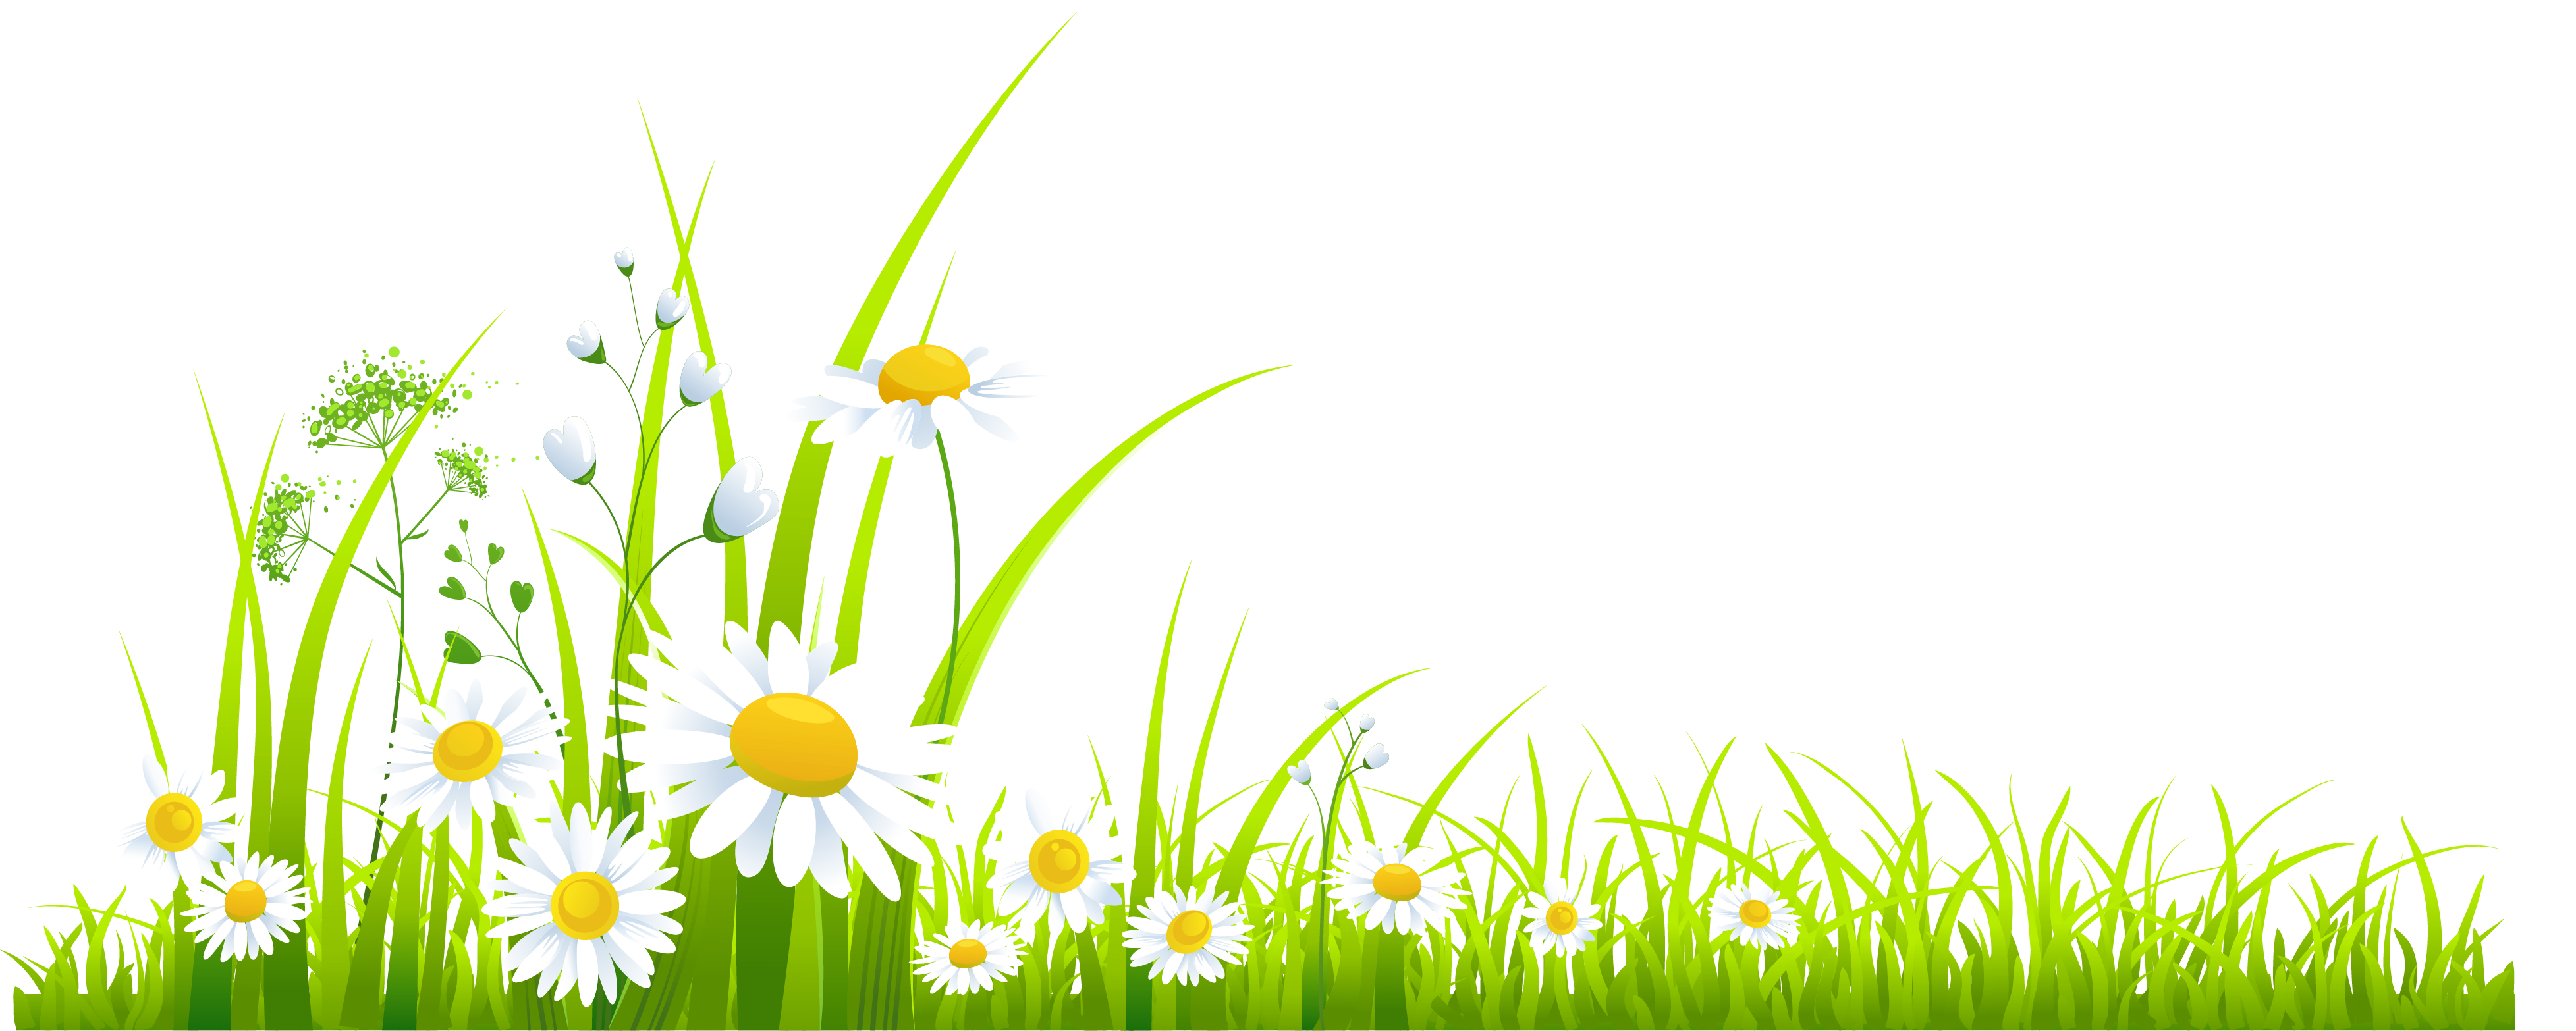 free clipart spring images - photo #50